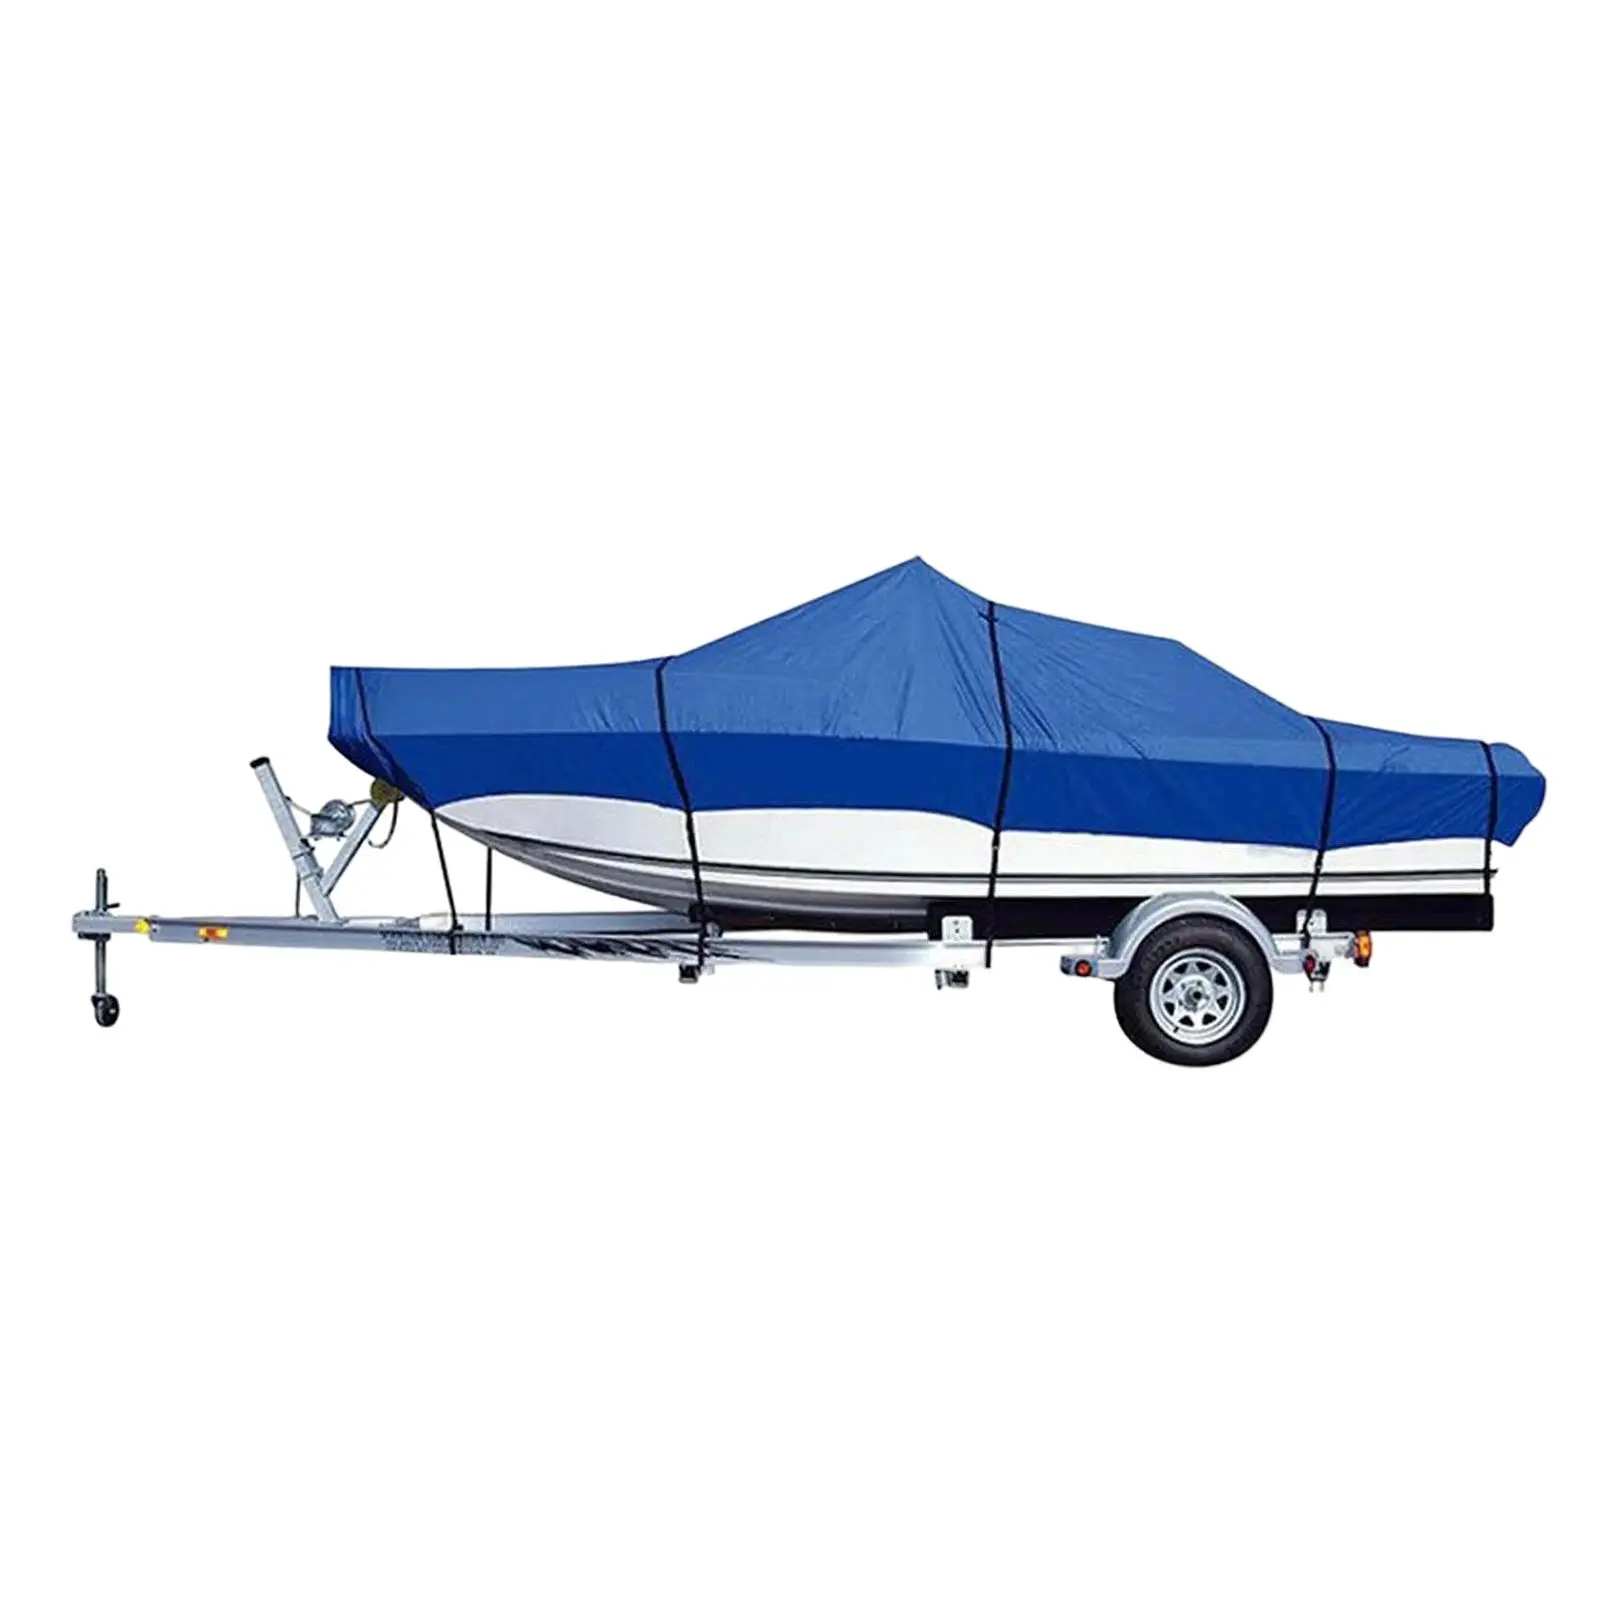 Universal Boat Cover,  with Drawstring Waterproof Heavy Duty Fit for  Fishing Boat Marine Dinghy Paddle Board